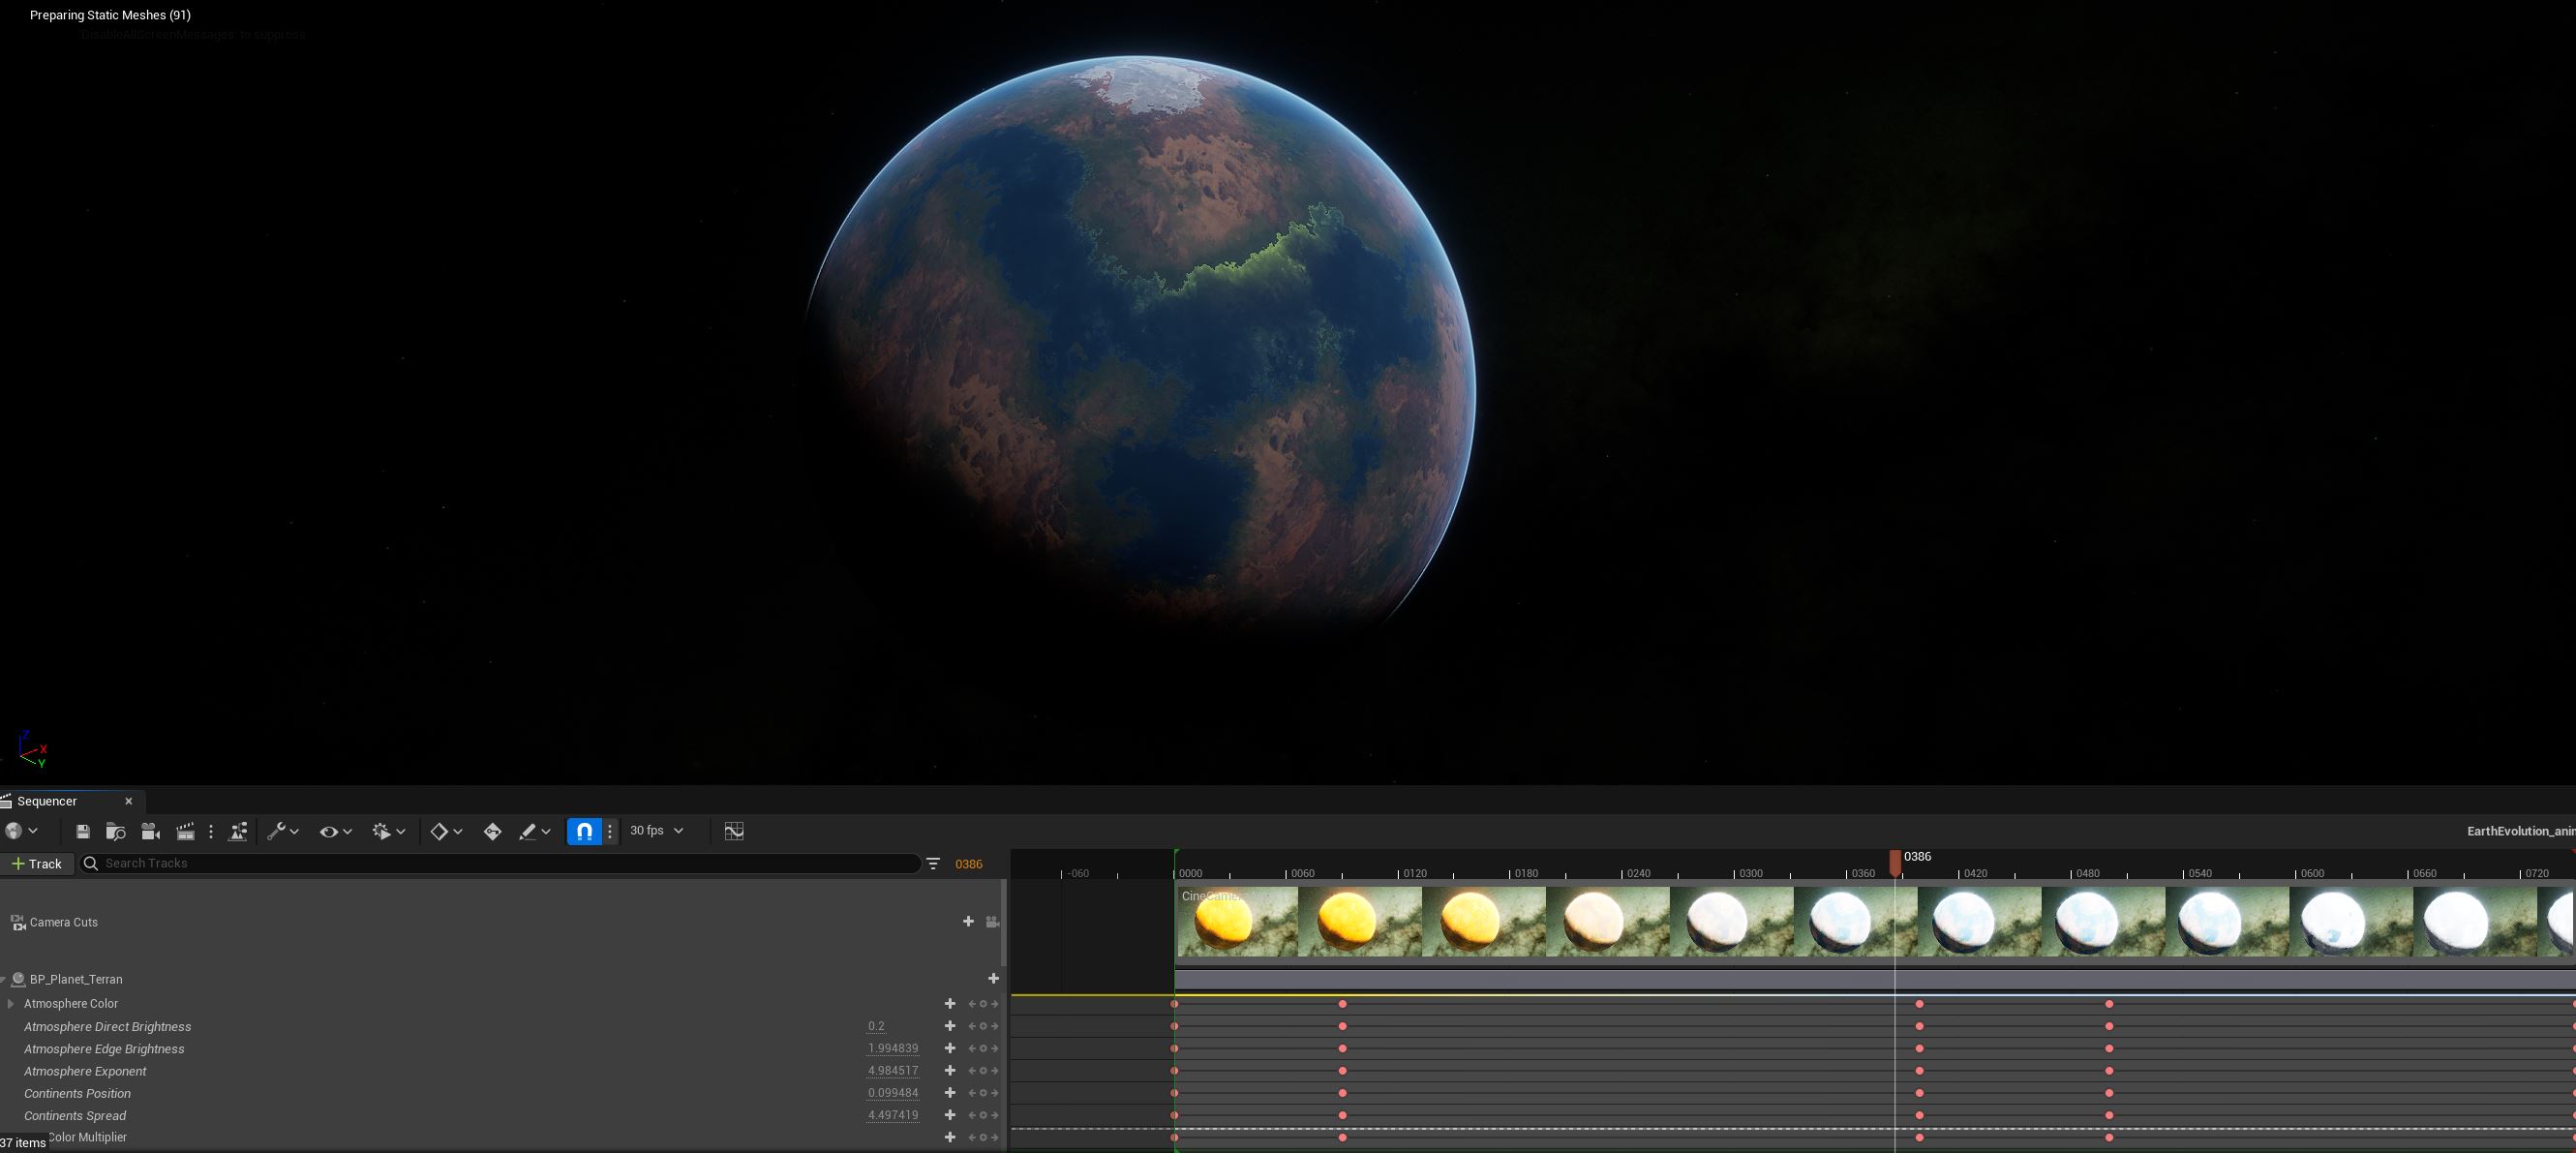 Snapshot from the animation showing Earth’s evolution from a Mars-like planet to its present form.